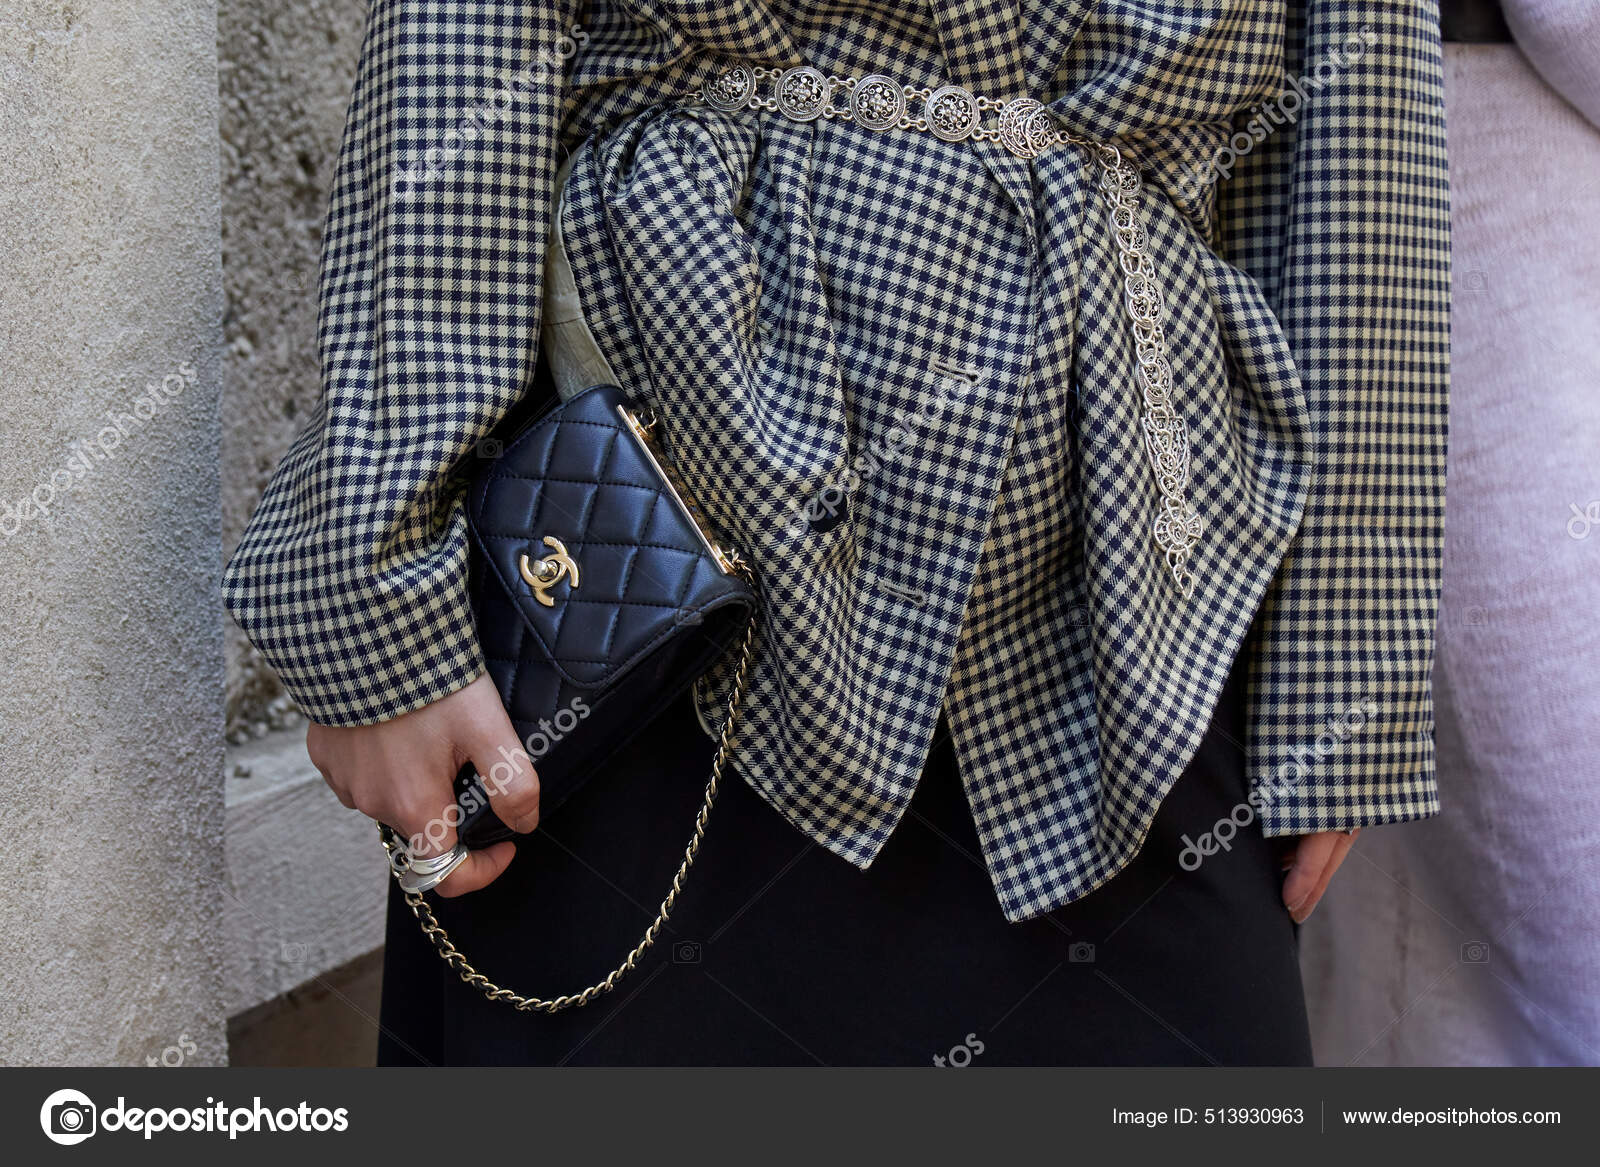 Milan Italy September 2021 Woman Black Leather Chanel Bag